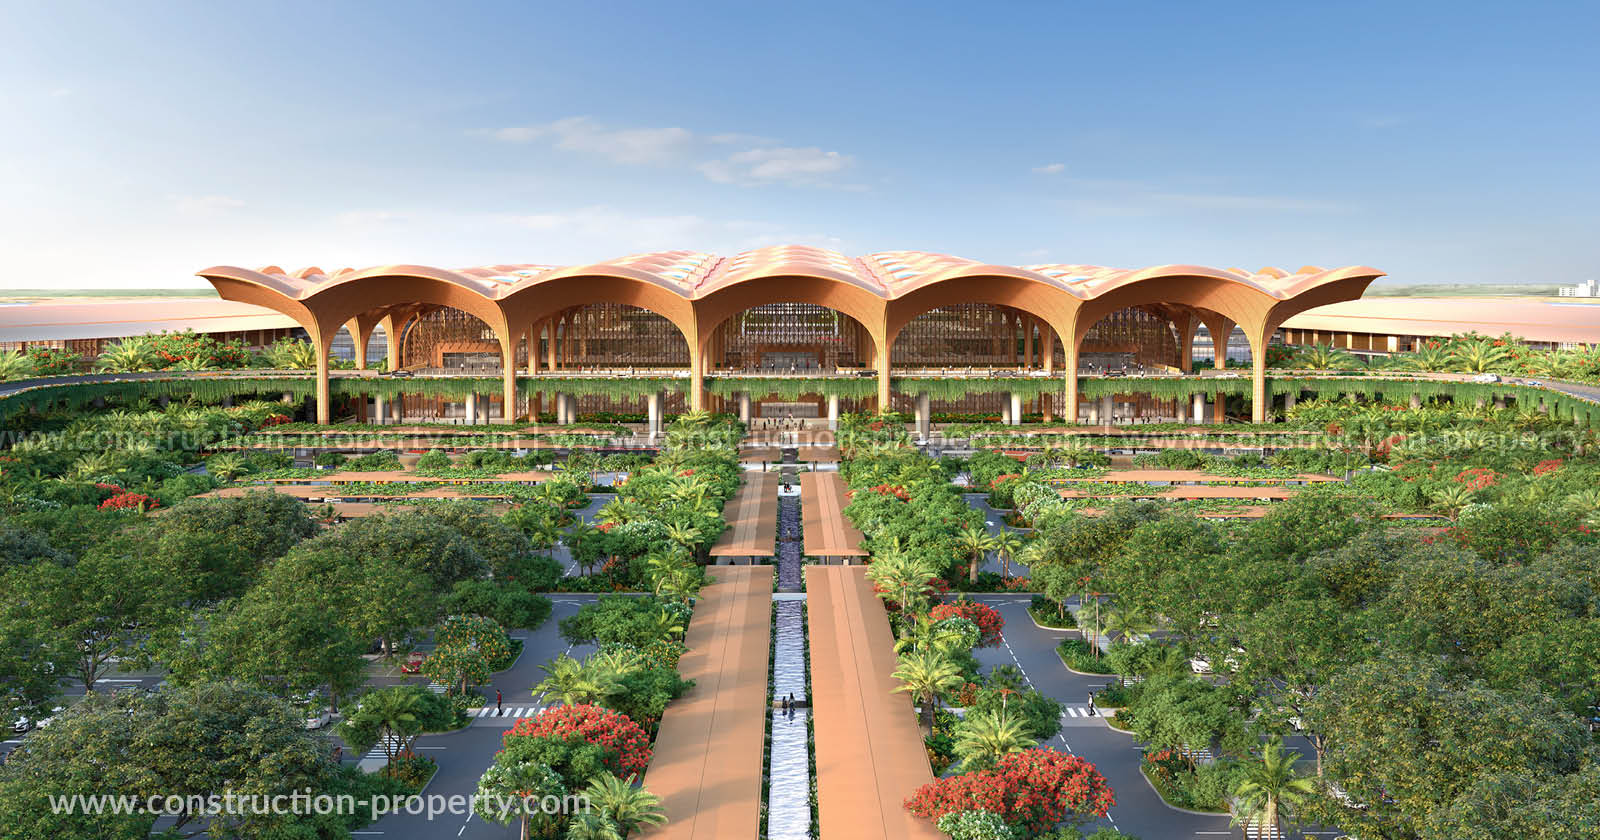 New Phnom Penh International Airport Expresses Cambodia’s Ambition to Promote Economic Growth Amid COVID-19